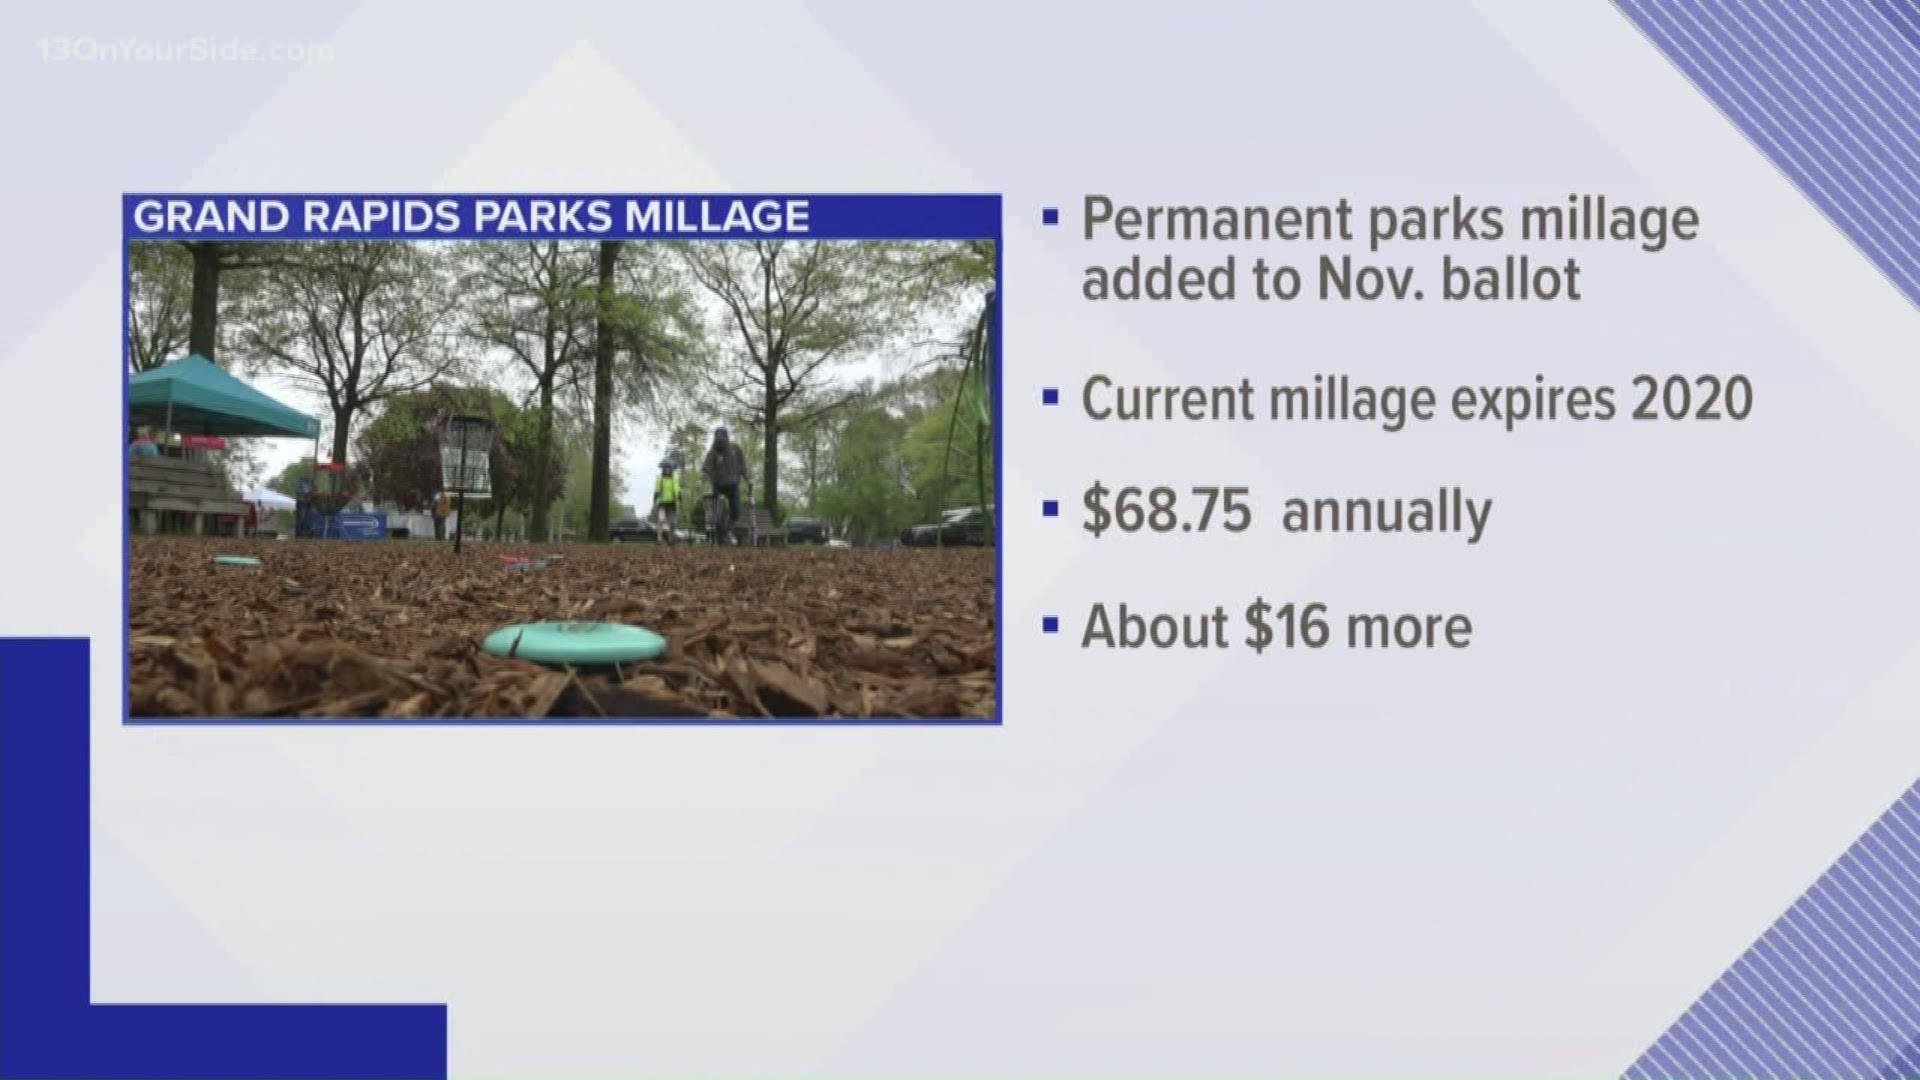 Voters will decide permanent parks millage in Grand Rapids